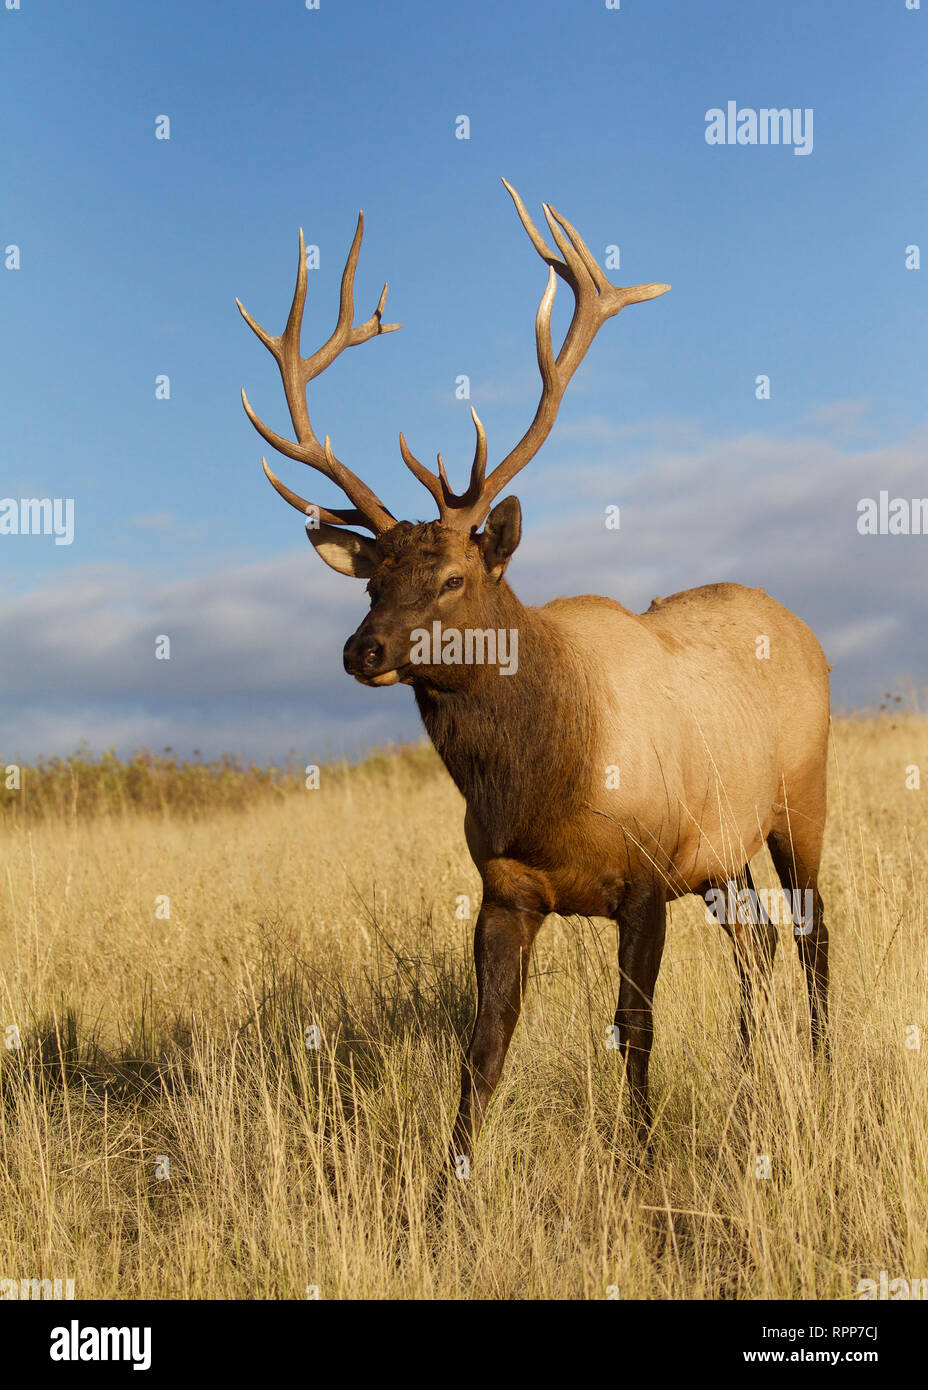 Rocky Mountain Elk in prairie grasslands against a natural background of blue sky with clouds Stock Photo